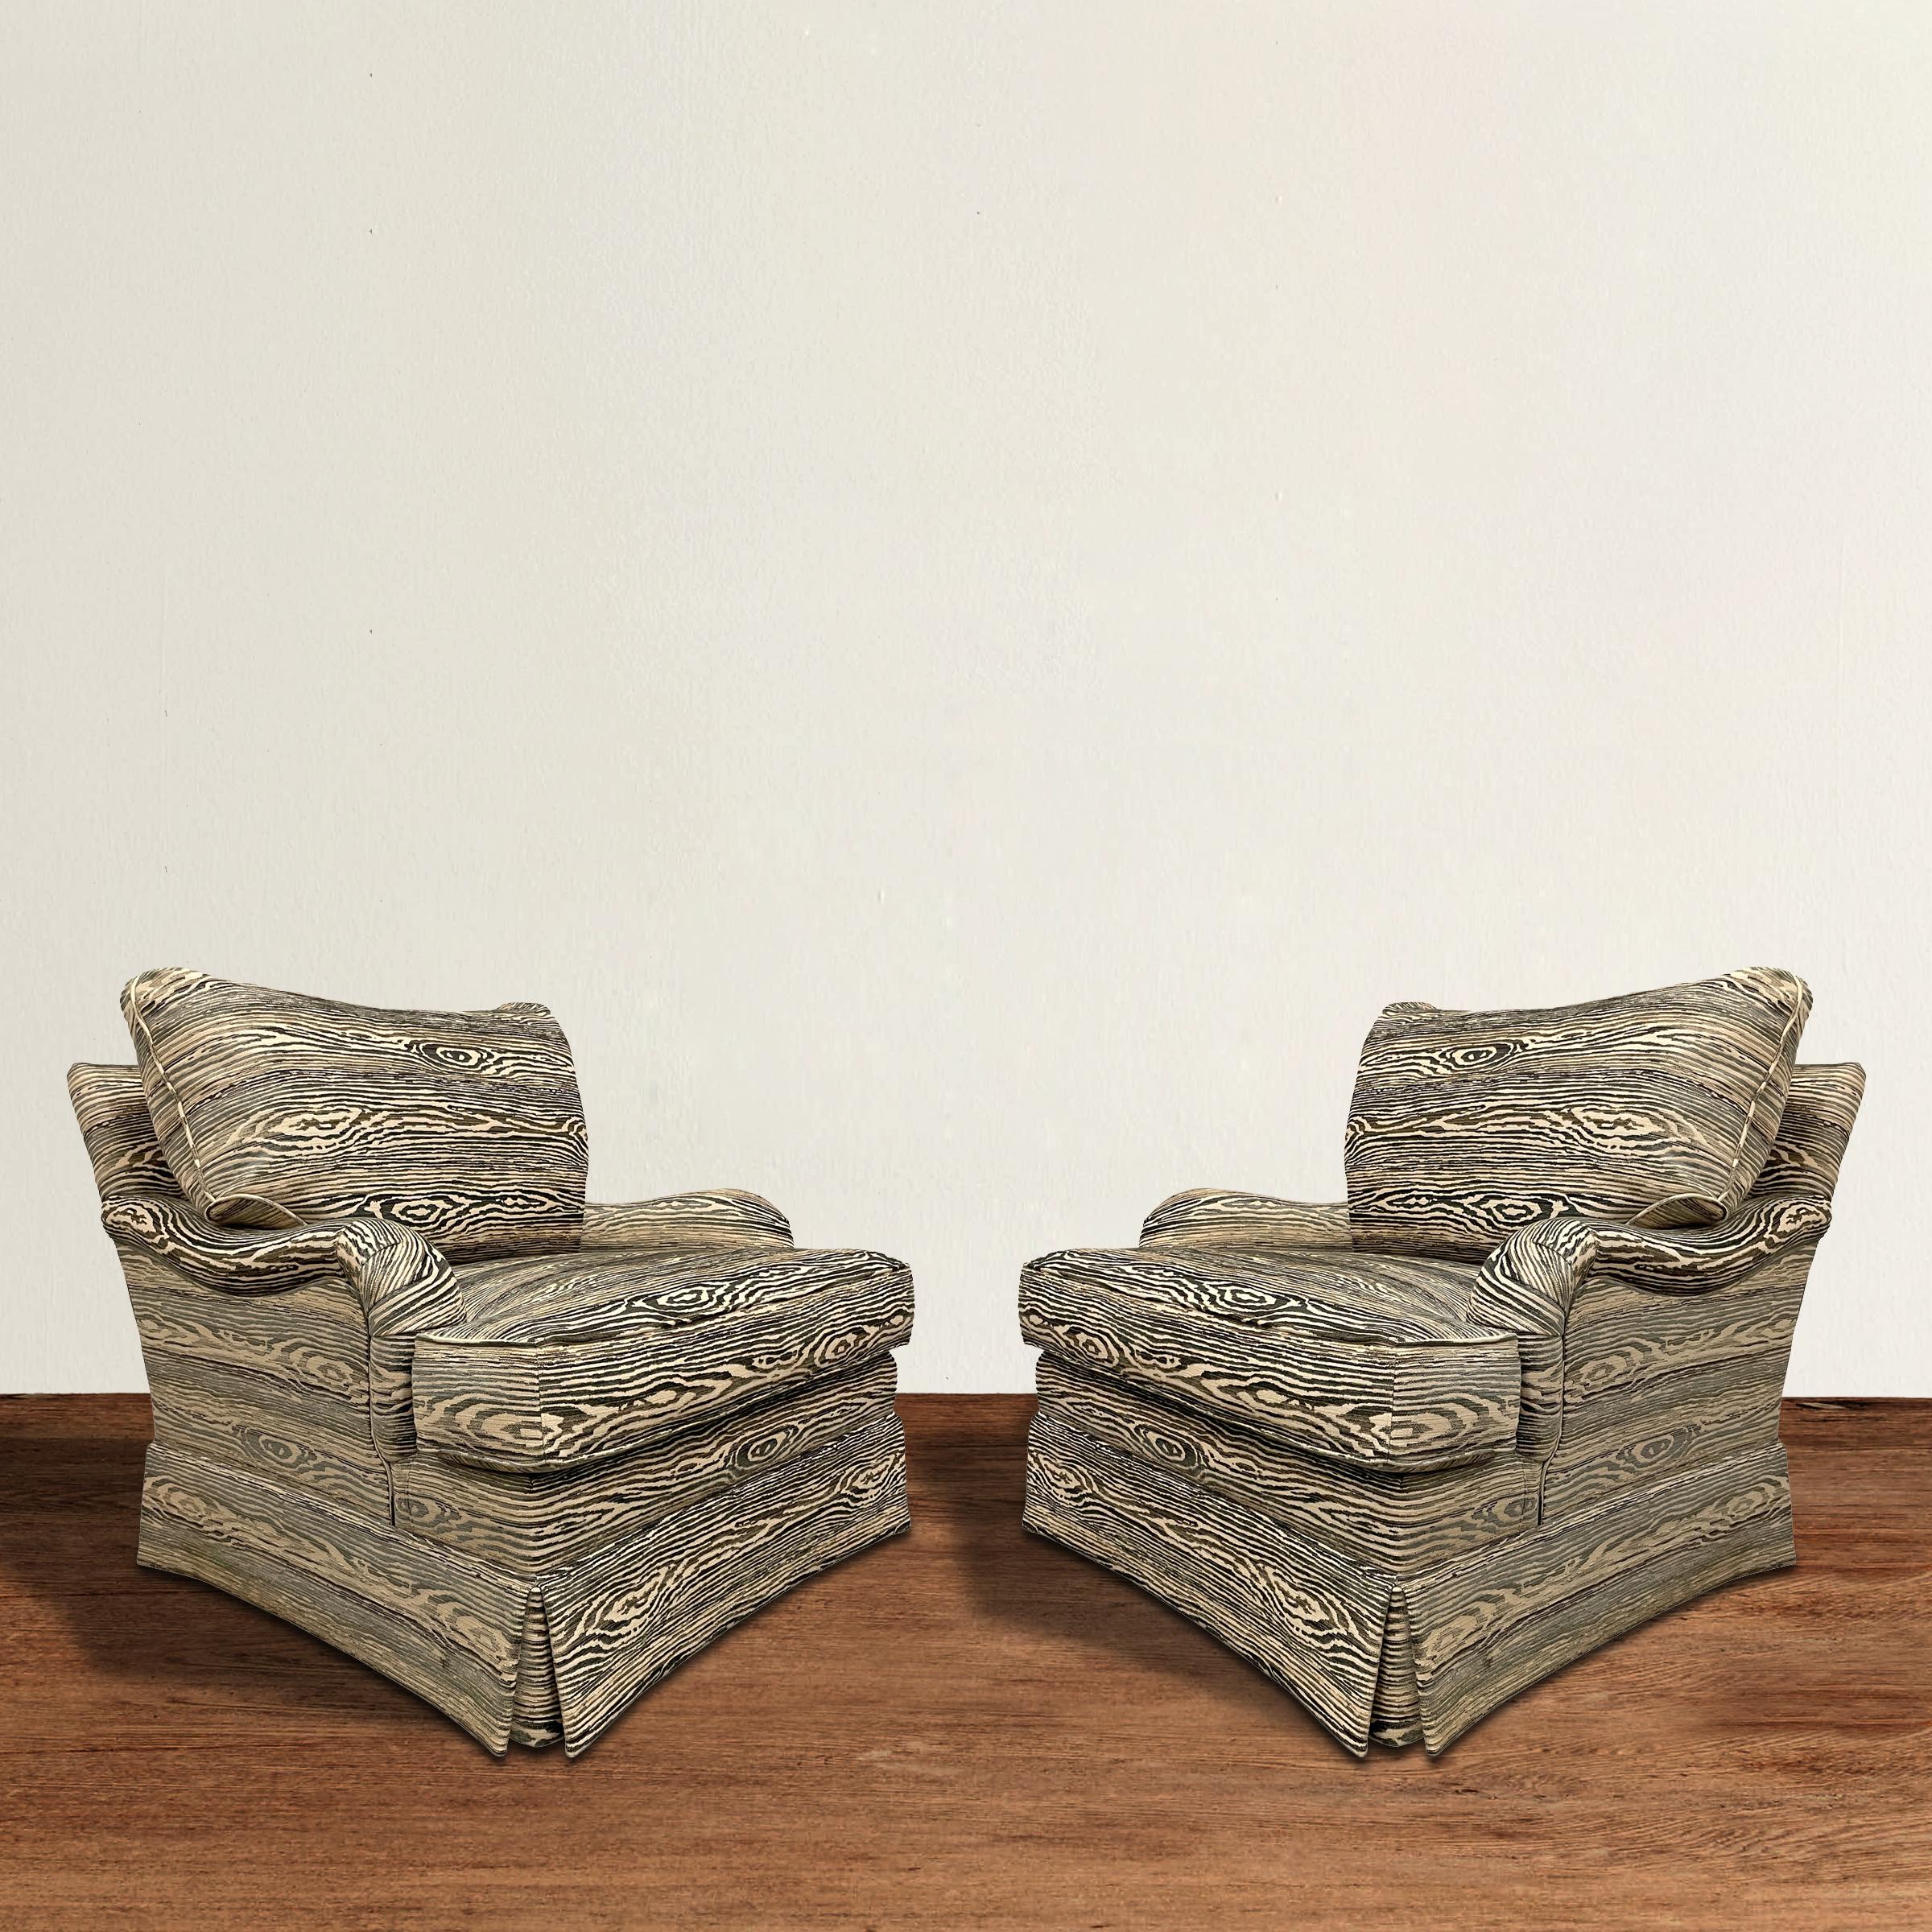 A spirited and spunky pair of 20th century English roll arm chairs upholstered in a bold chenille with raised faux-bois wood grain pattern. Down-filled back and seat cushions, skirted bases, and a down-filled throw pillow included with each chair.